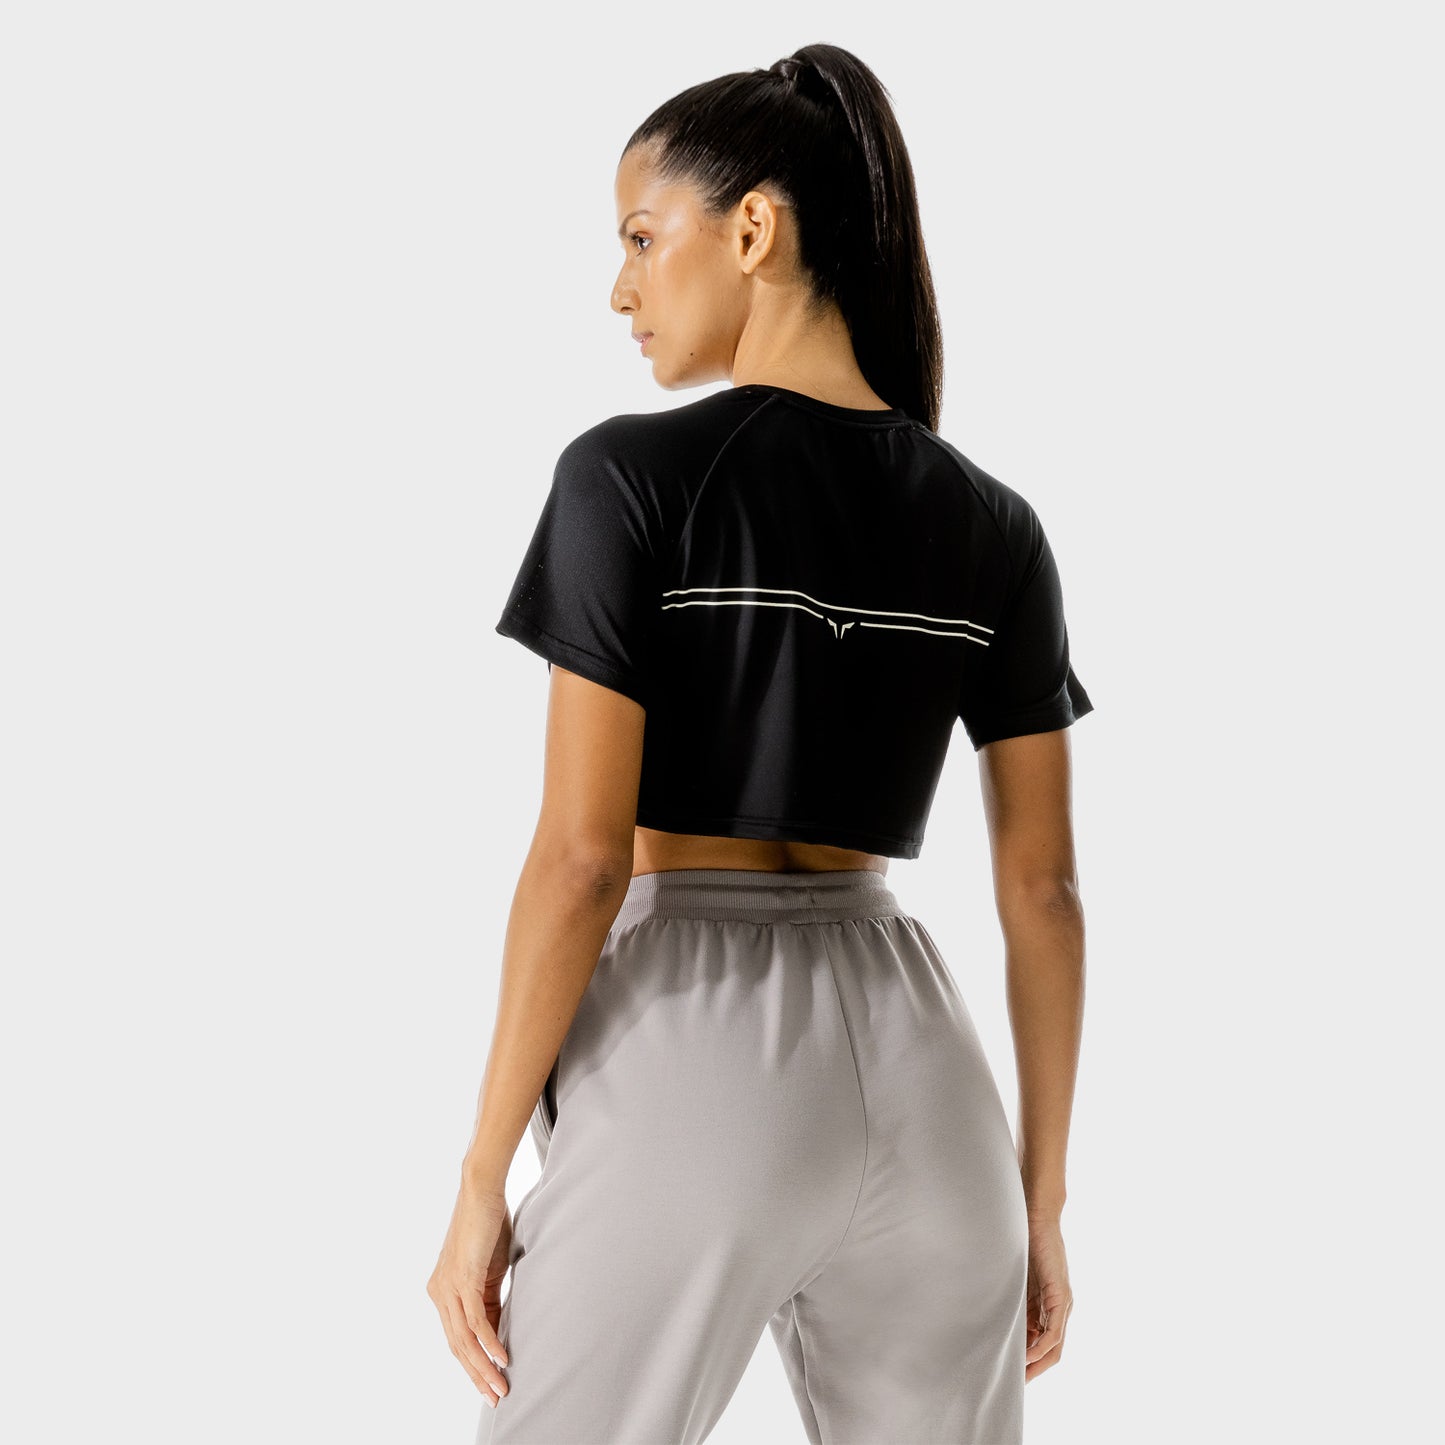 squatwolf-gym-t-shirts-for-women-lab-360-crop-tee-black-workout-clothes